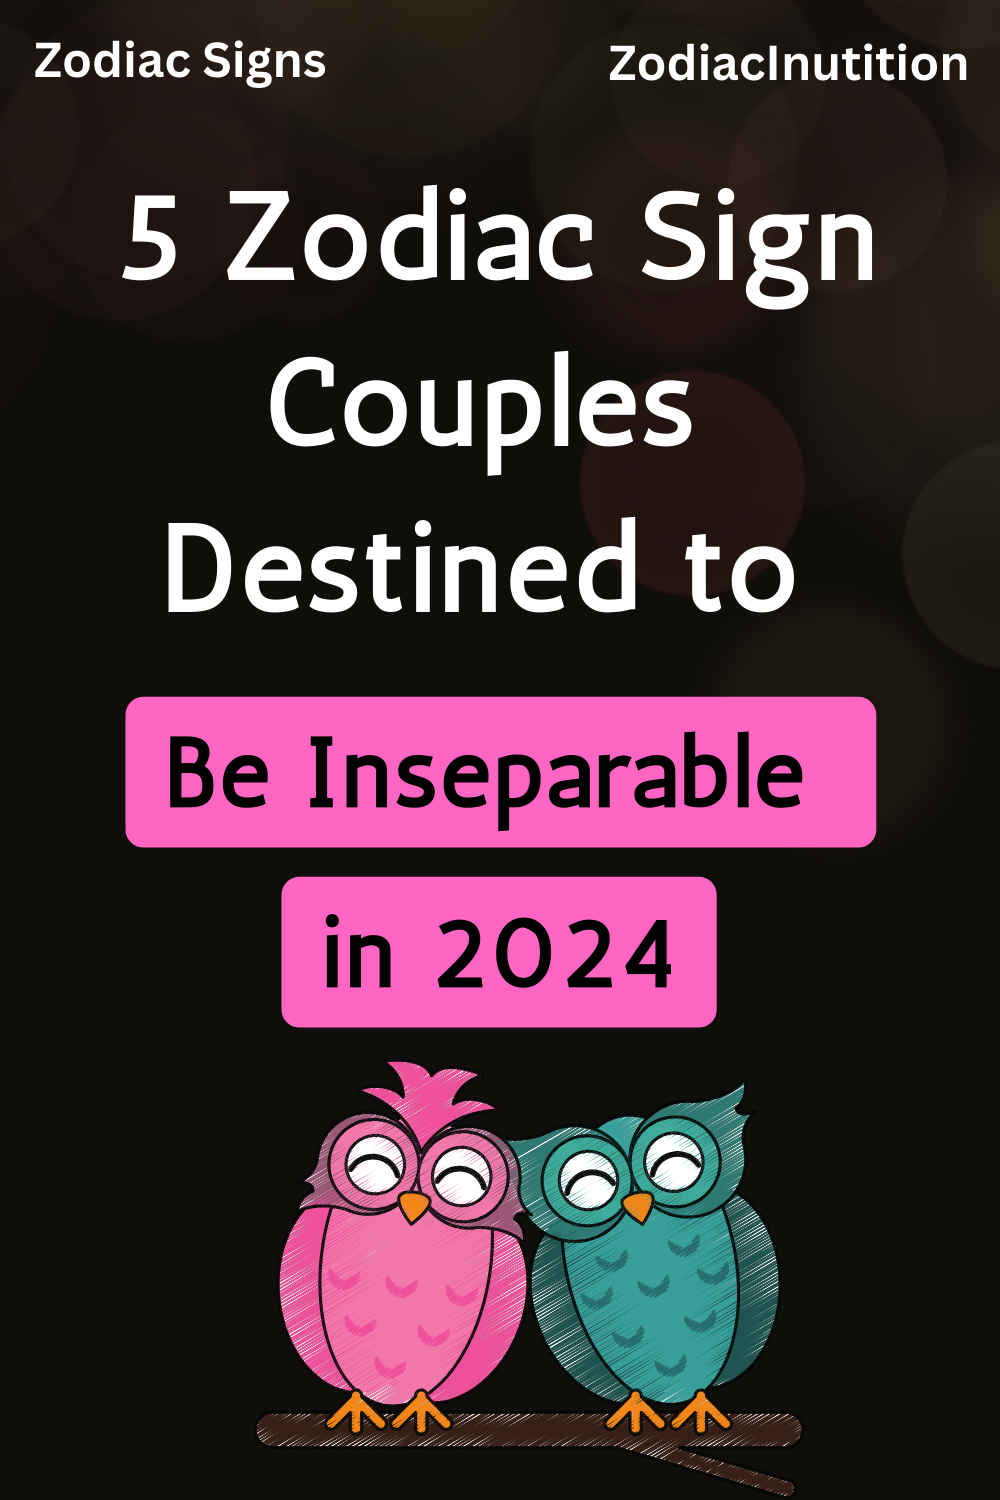 5 Zodiac Sign Couples Destined to Be Inseparable in 2024